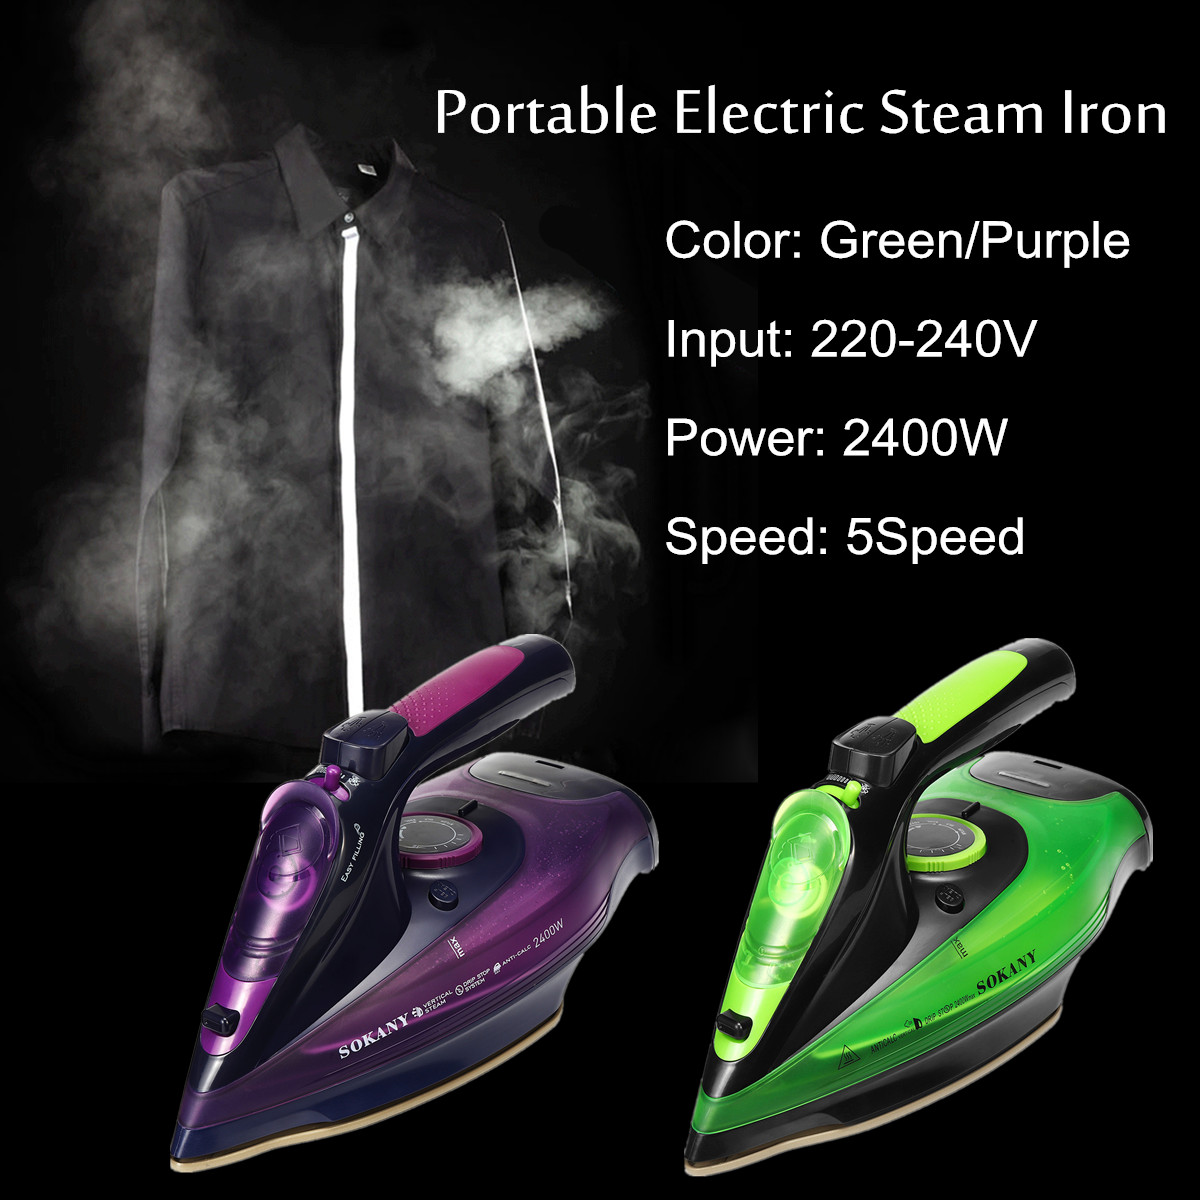 2400W-220V-Cordless-Steam-Iron-Multifunction-Clothes-Docking-Station-Dry-Ironing-Industry-1346803-3